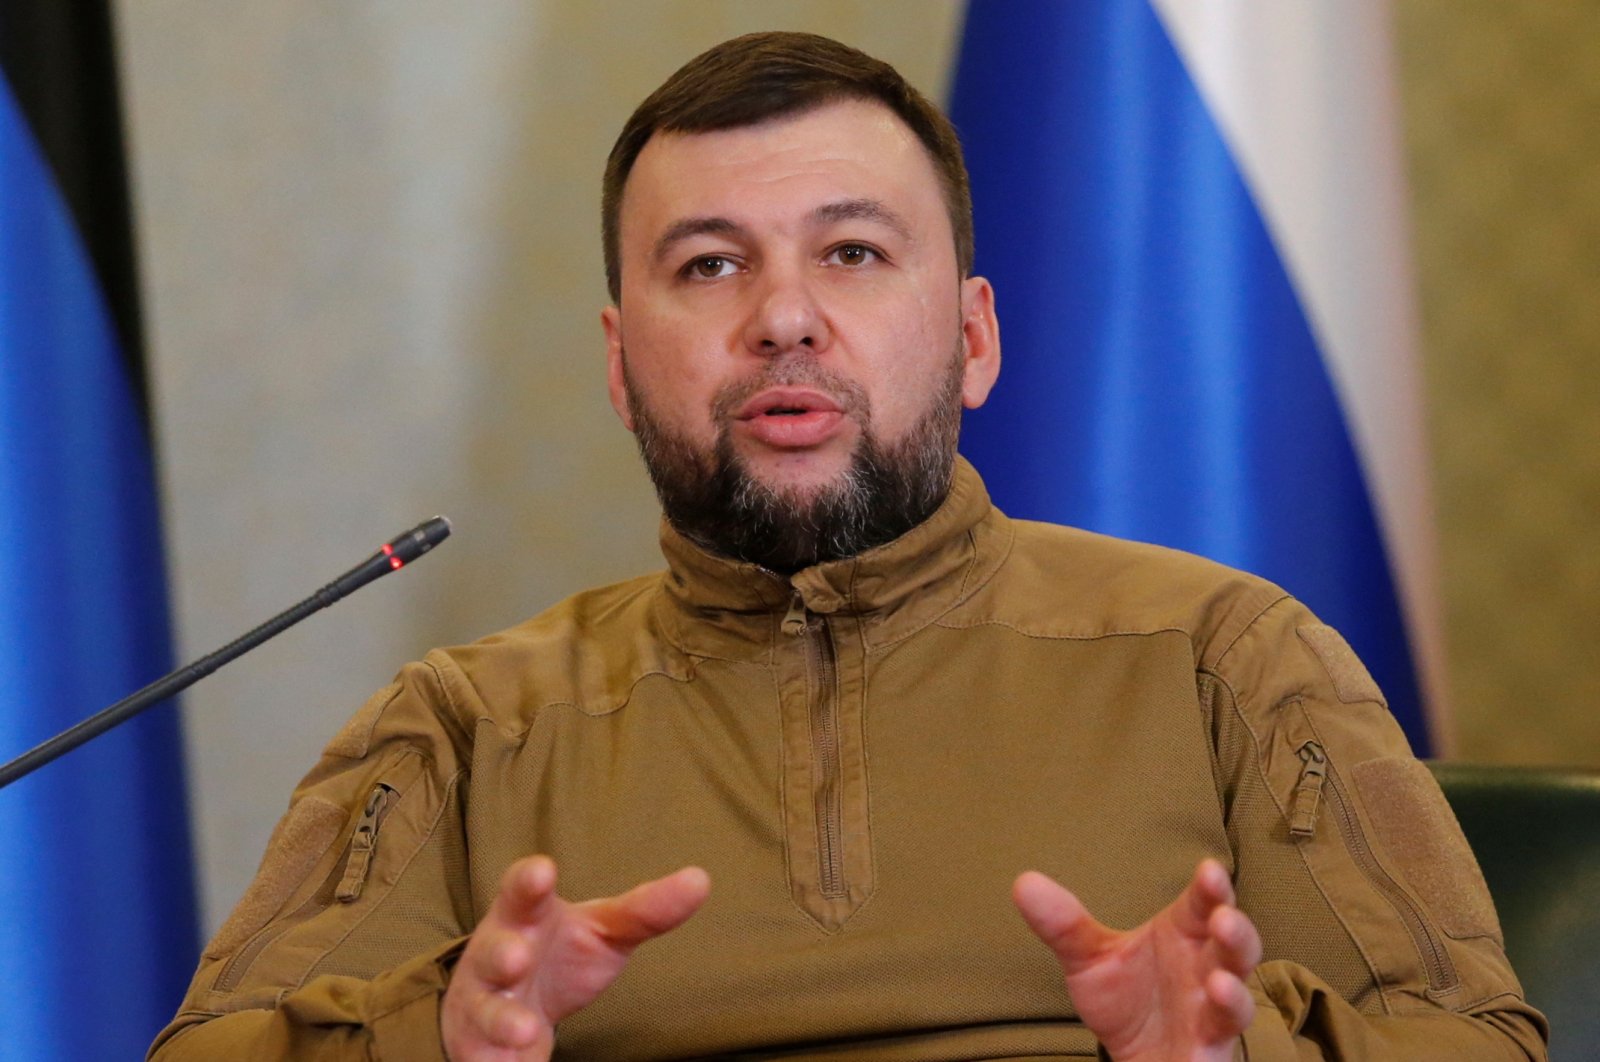 Head of the separatist self-proclaimed Donetsk People&#039;s Republic Denis Pushilin attends a news conference in Donetsk, Ukraine, Feb. 23, 2022. (Reuters Photo)